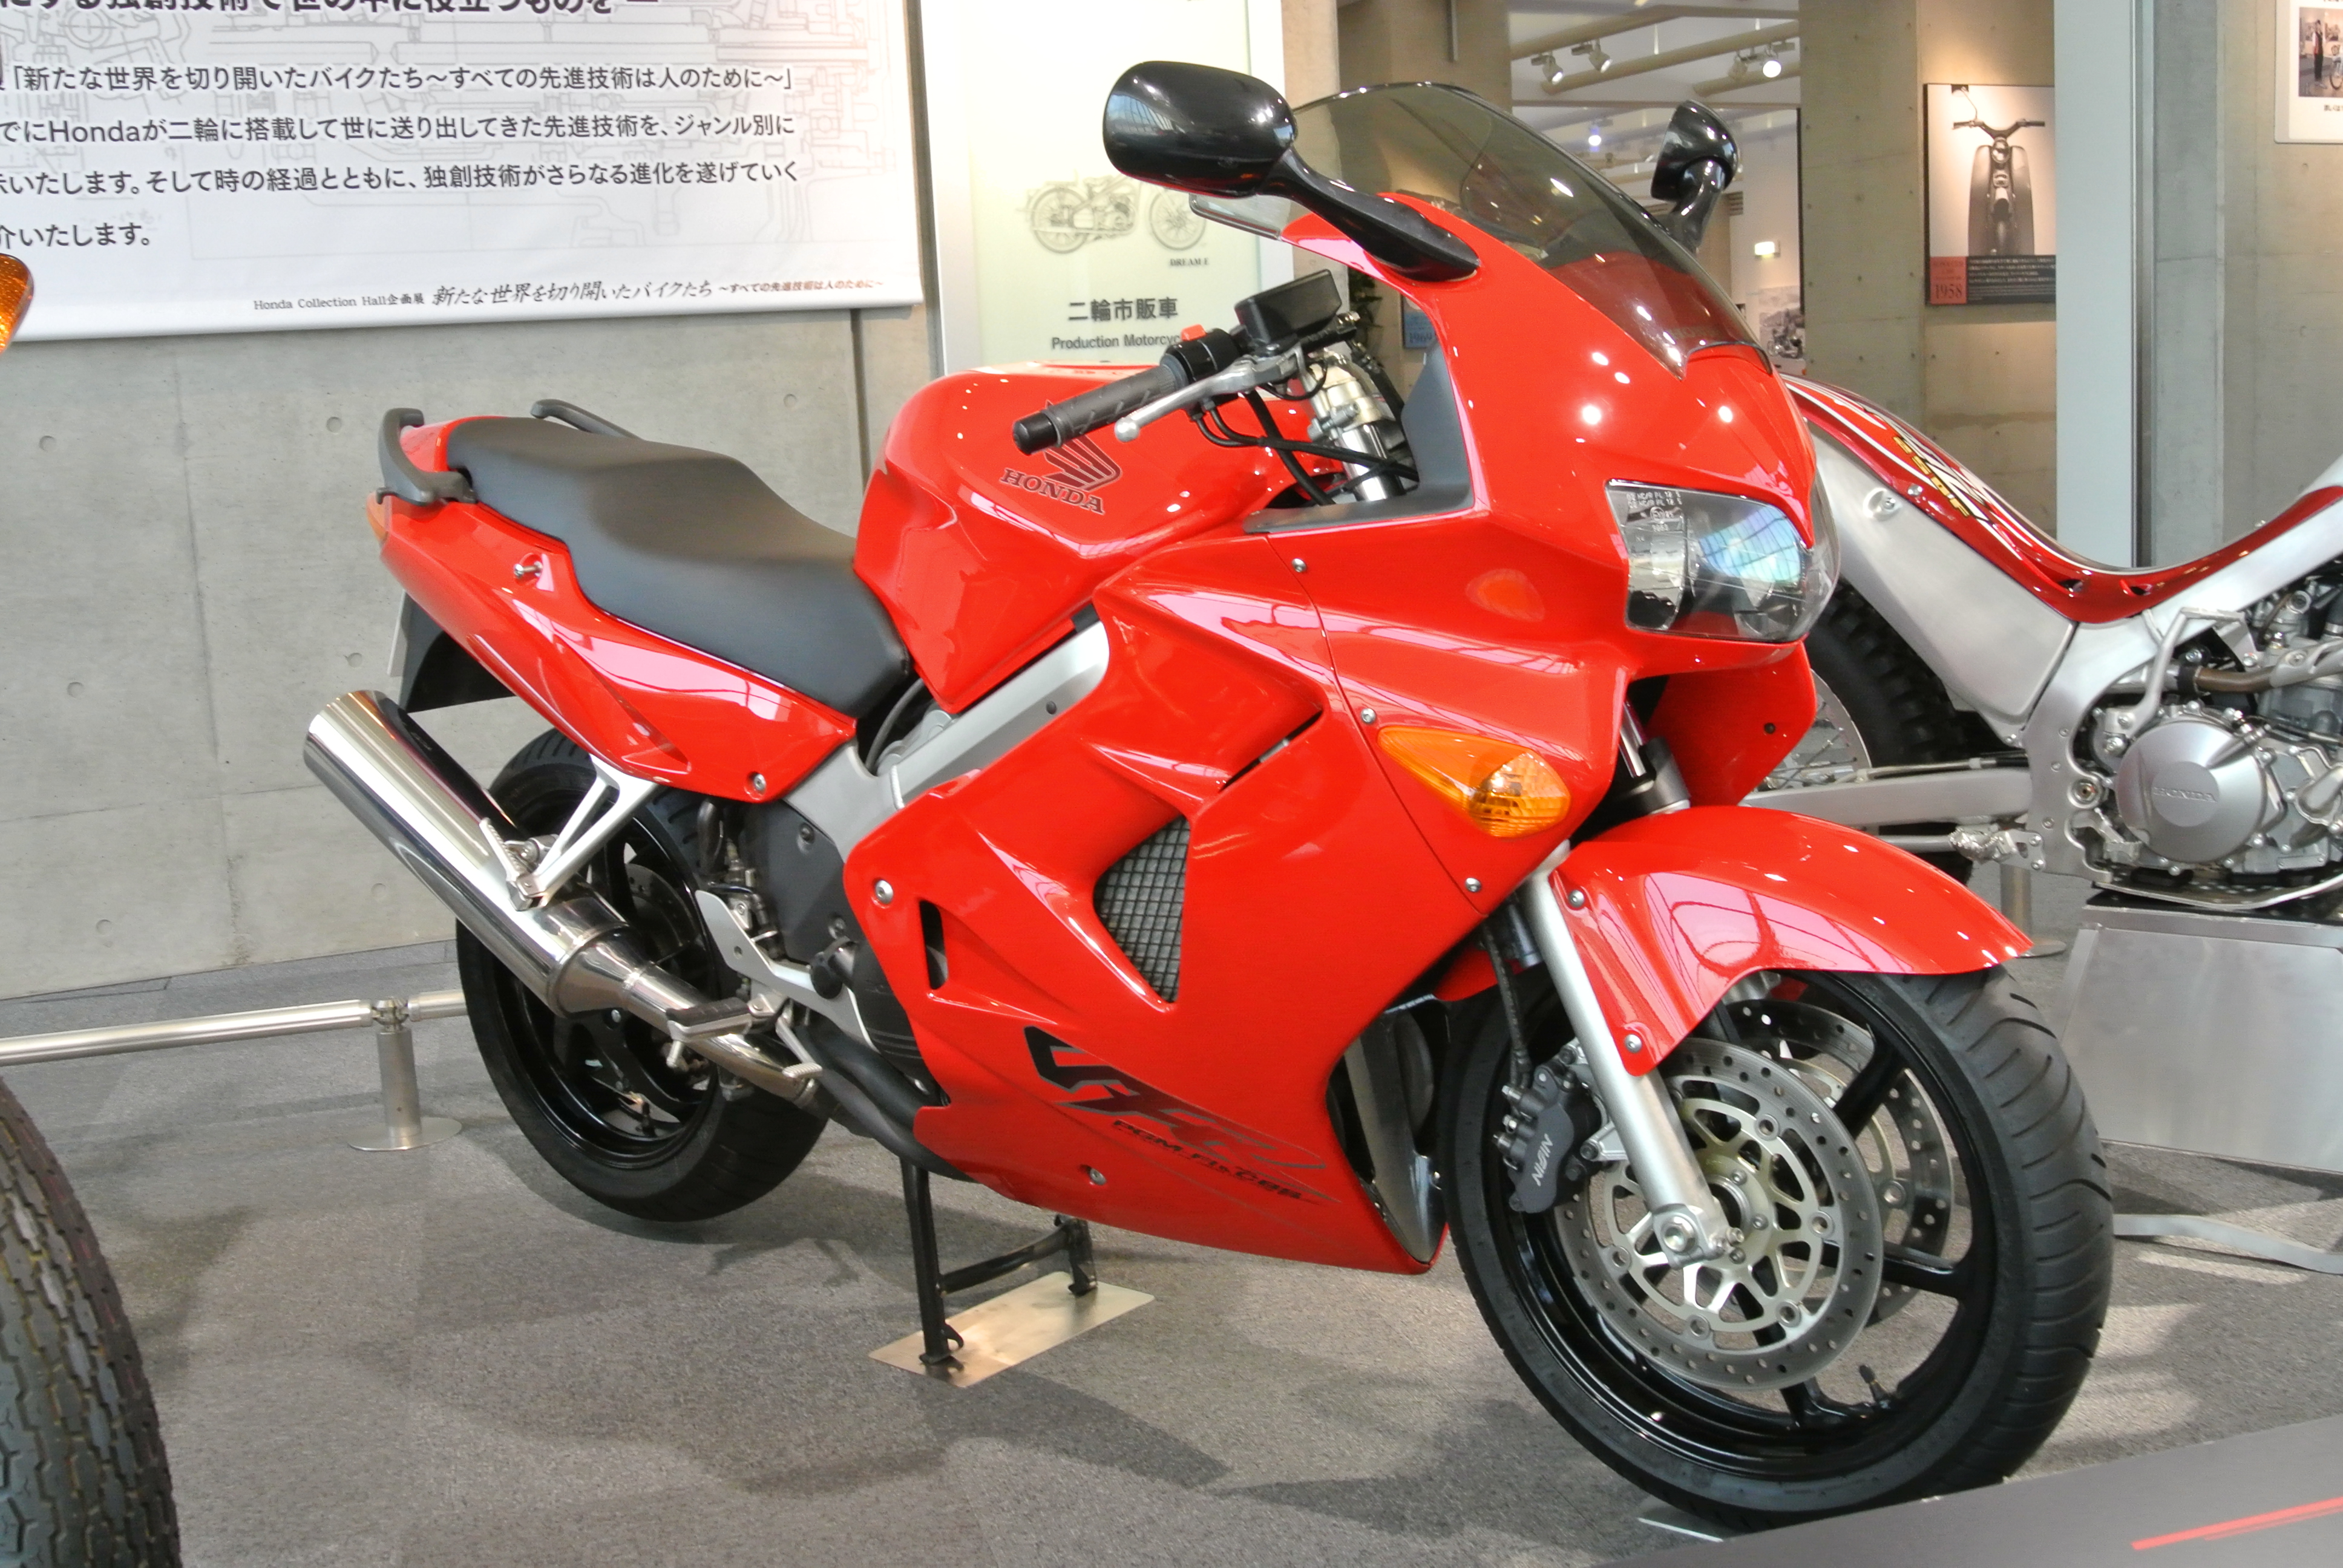 File Honda Vfr800 Fi In The Honda Collection Hall Jpg Wikimedia Commons